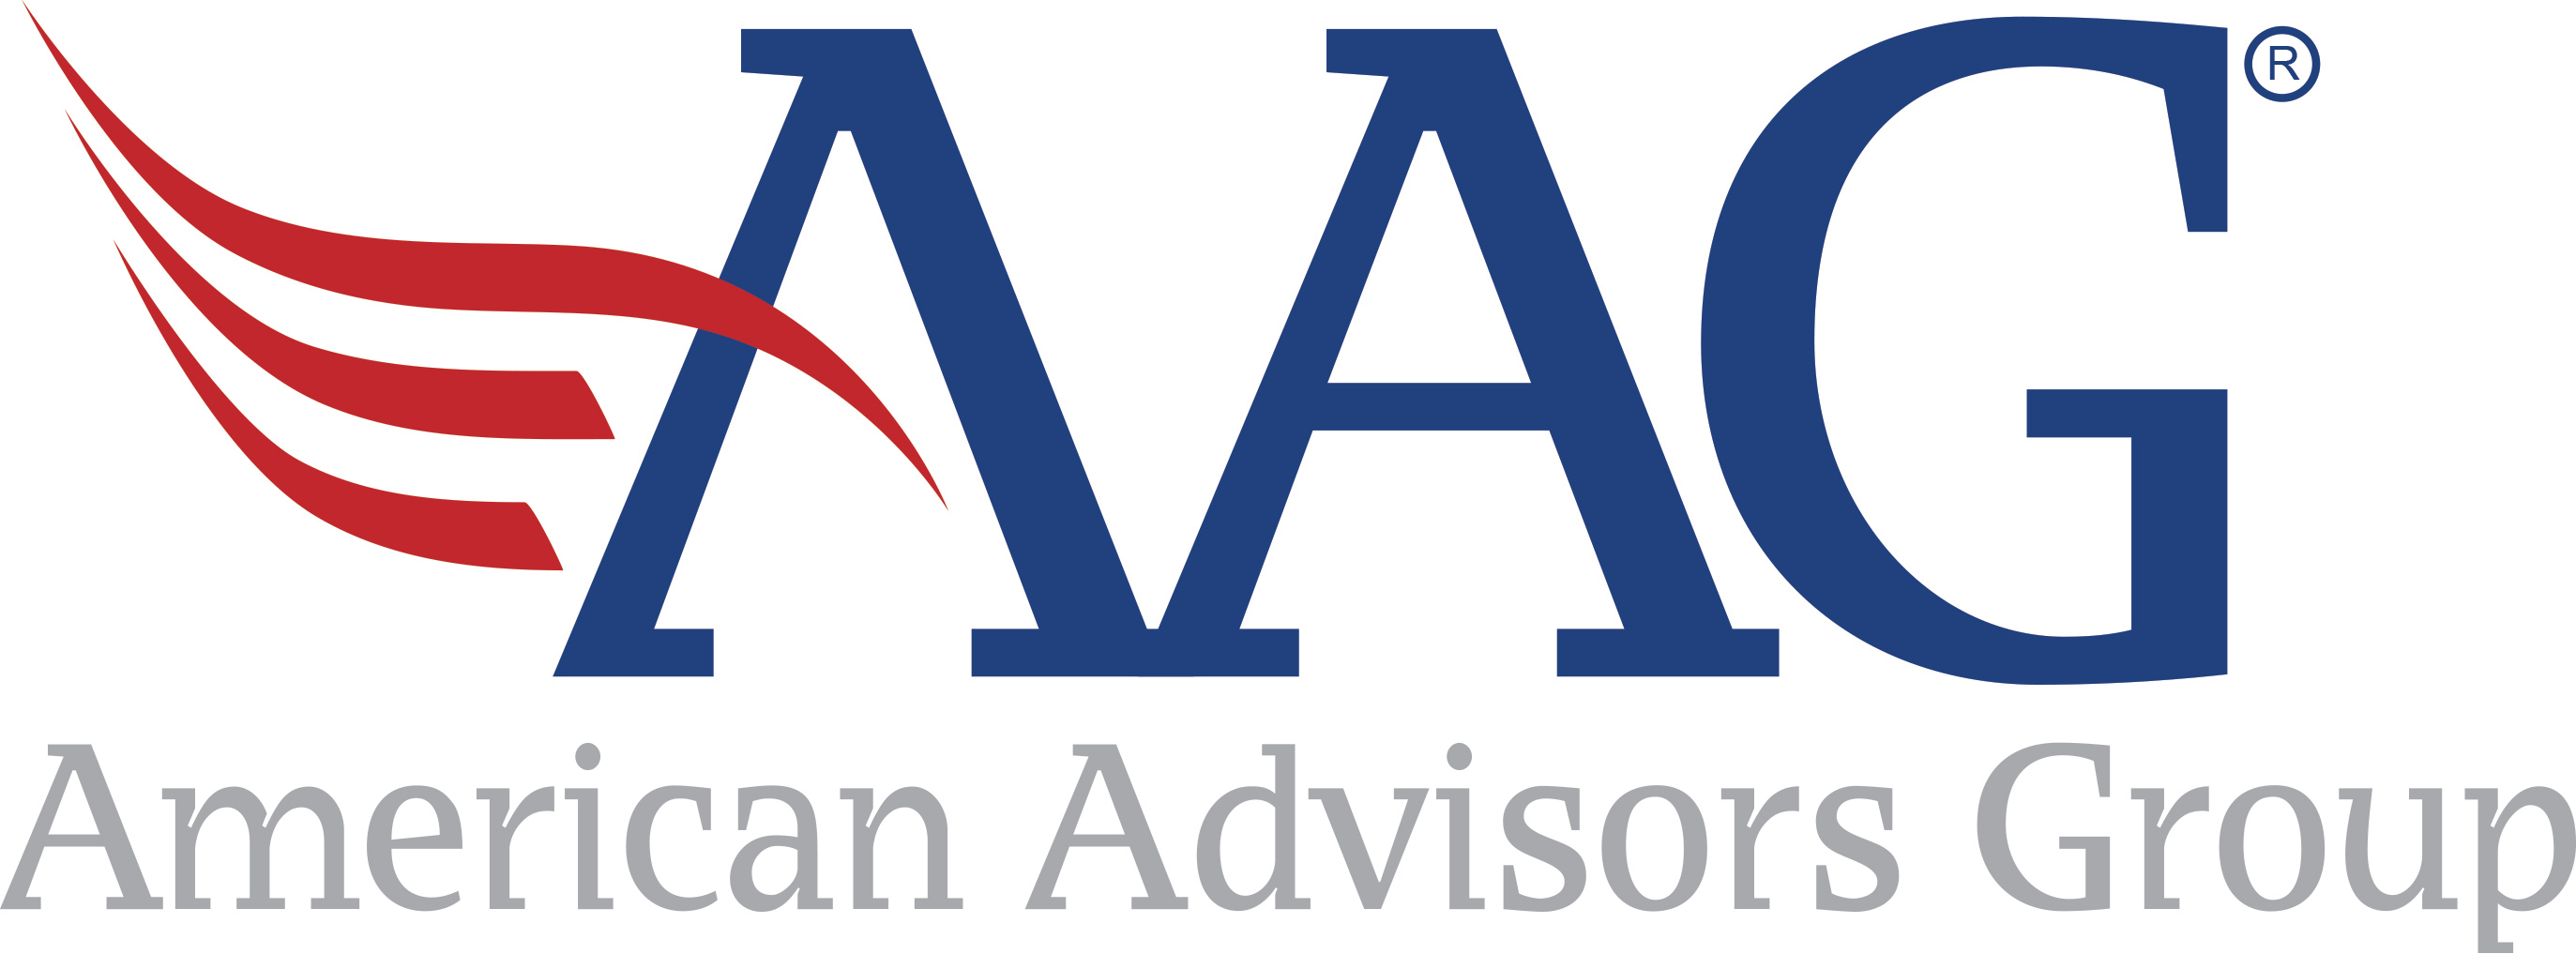 Reverse mortgage provider American Advisors Group (AAG) is adding Veterans Affairs (VA) loans to its product lineup